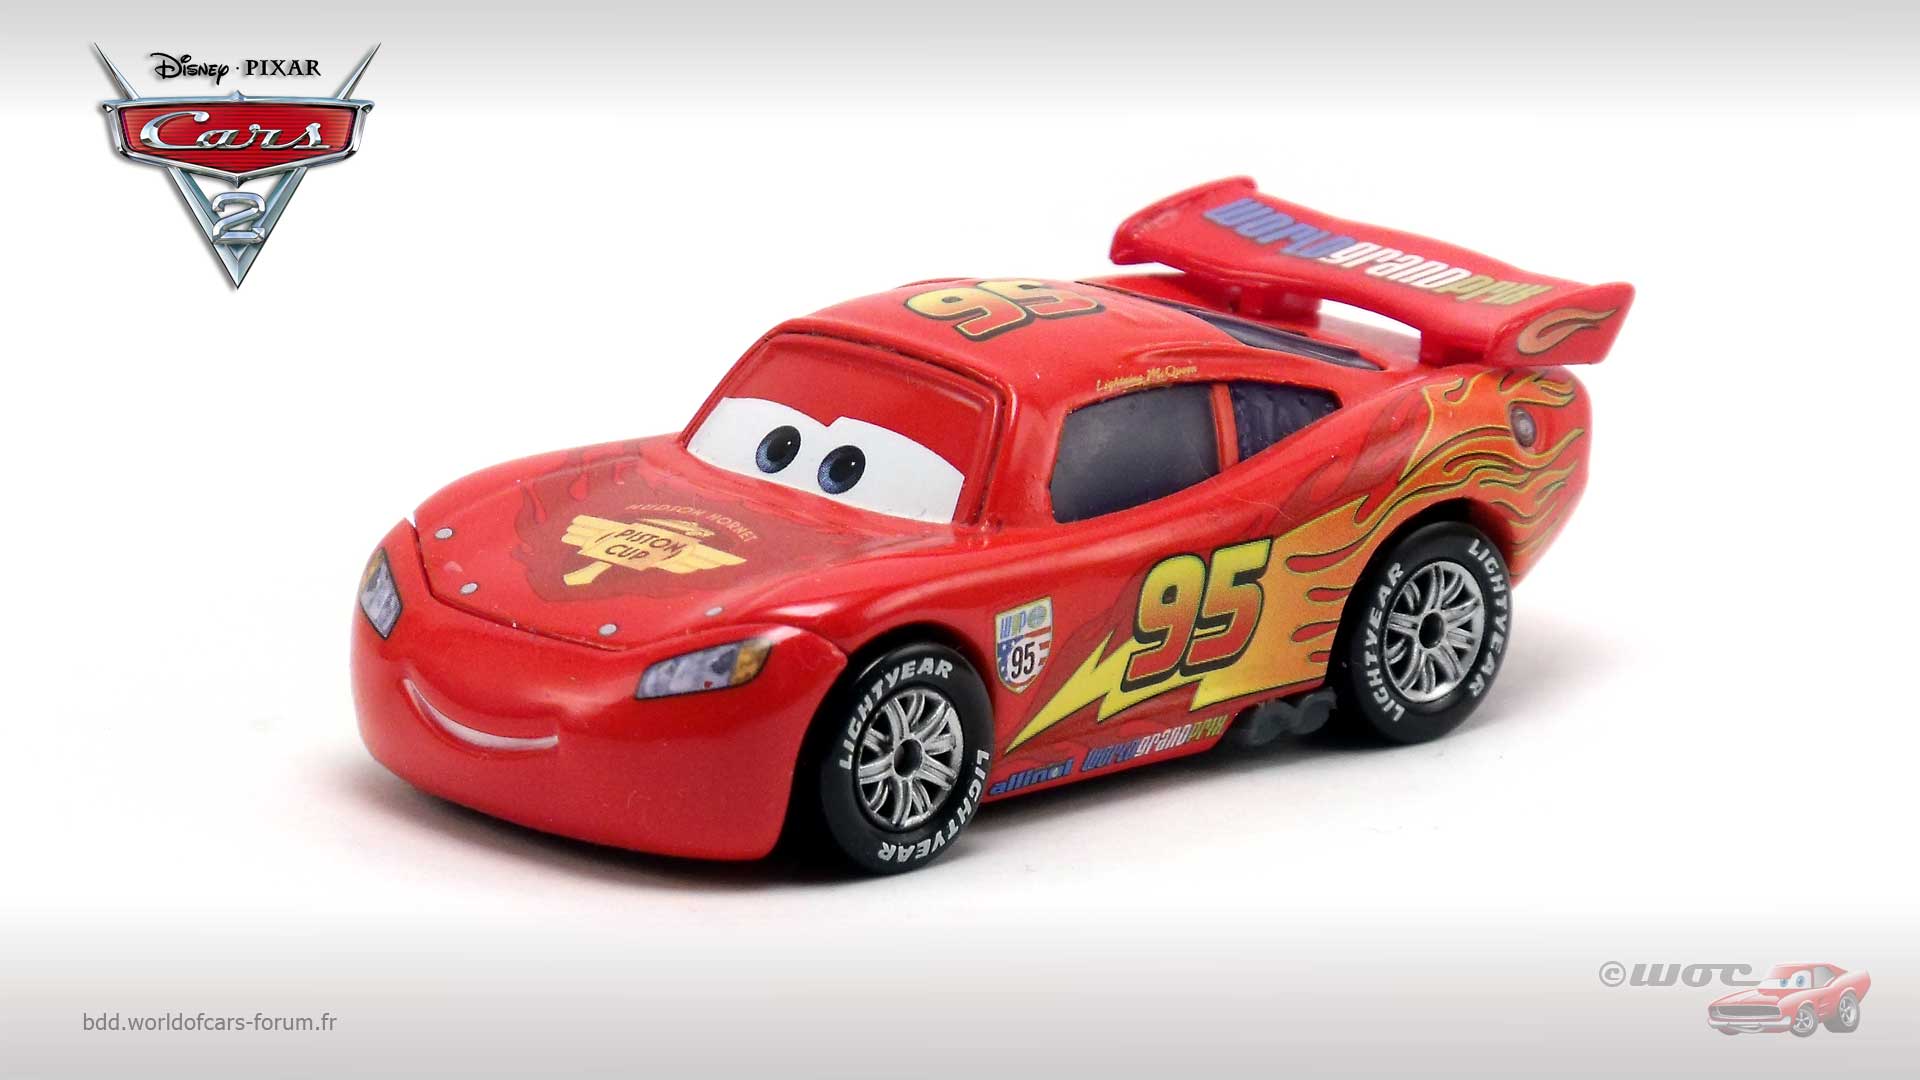 Lightning McQueen with Party Wheels